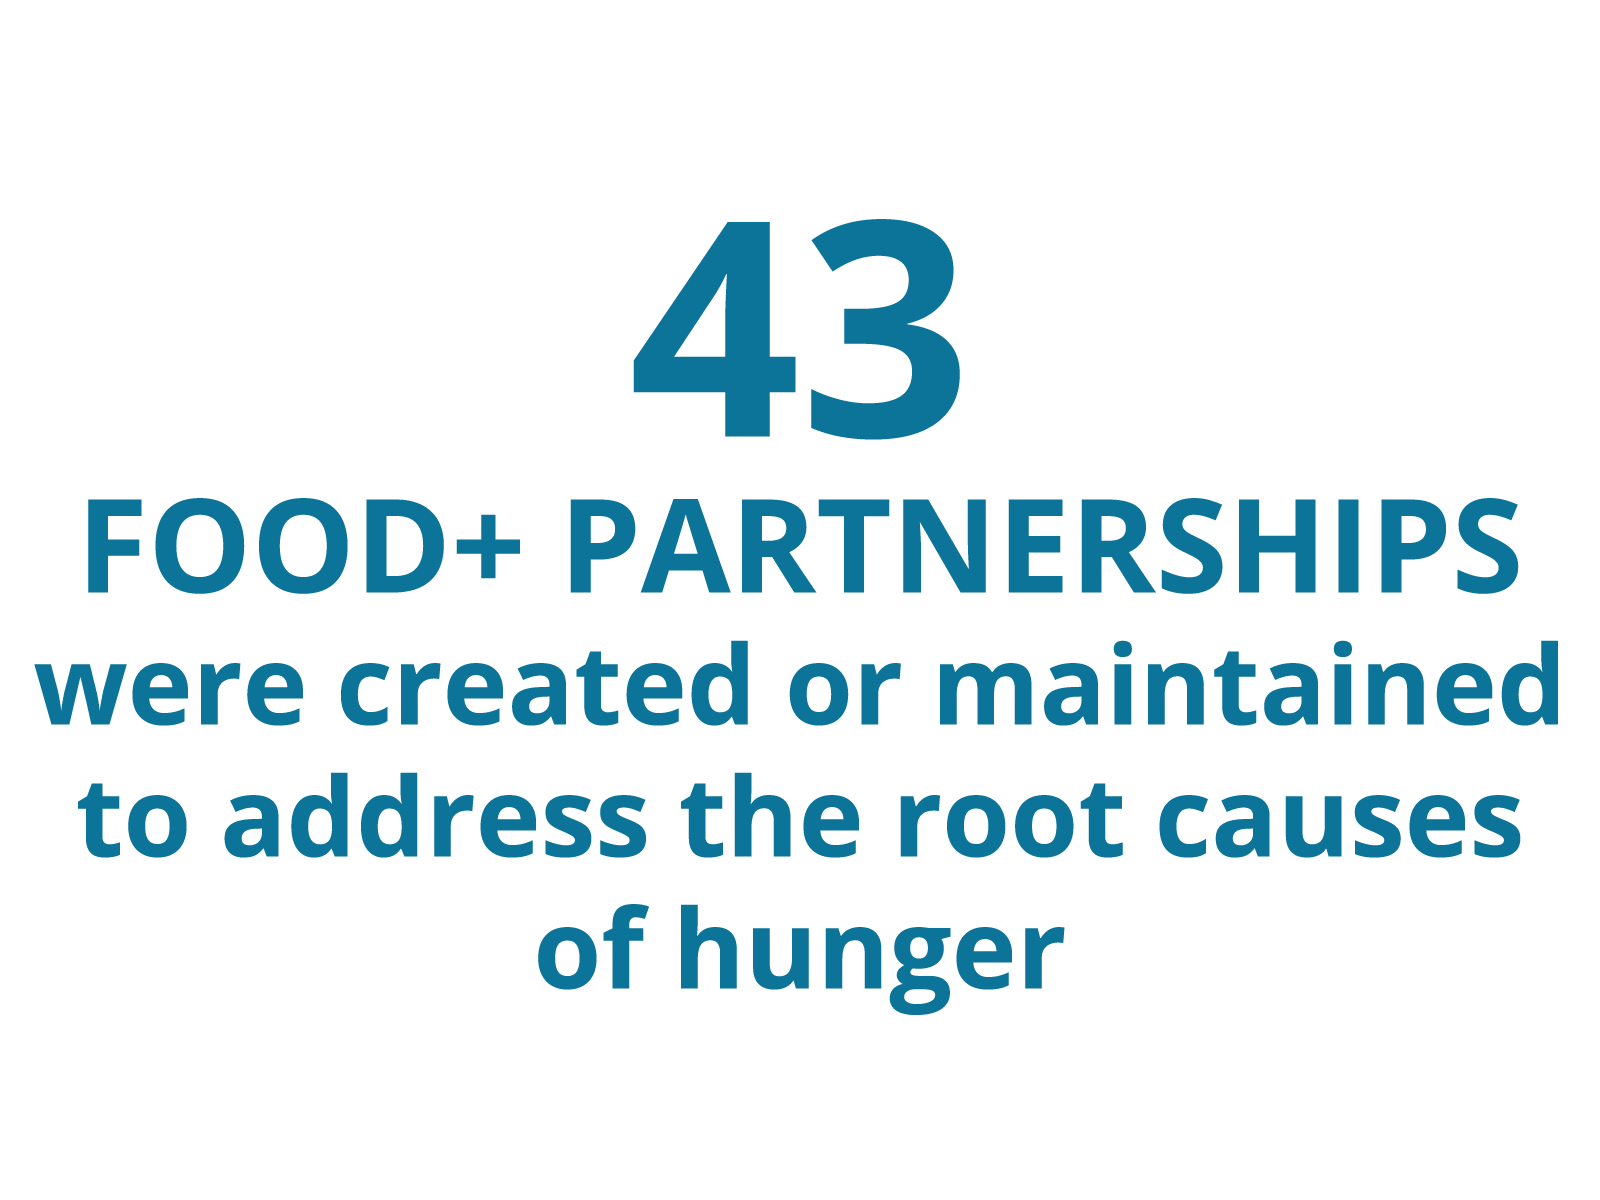 43 Food+ Partnerships were created or maintained to address the root causes of hunger